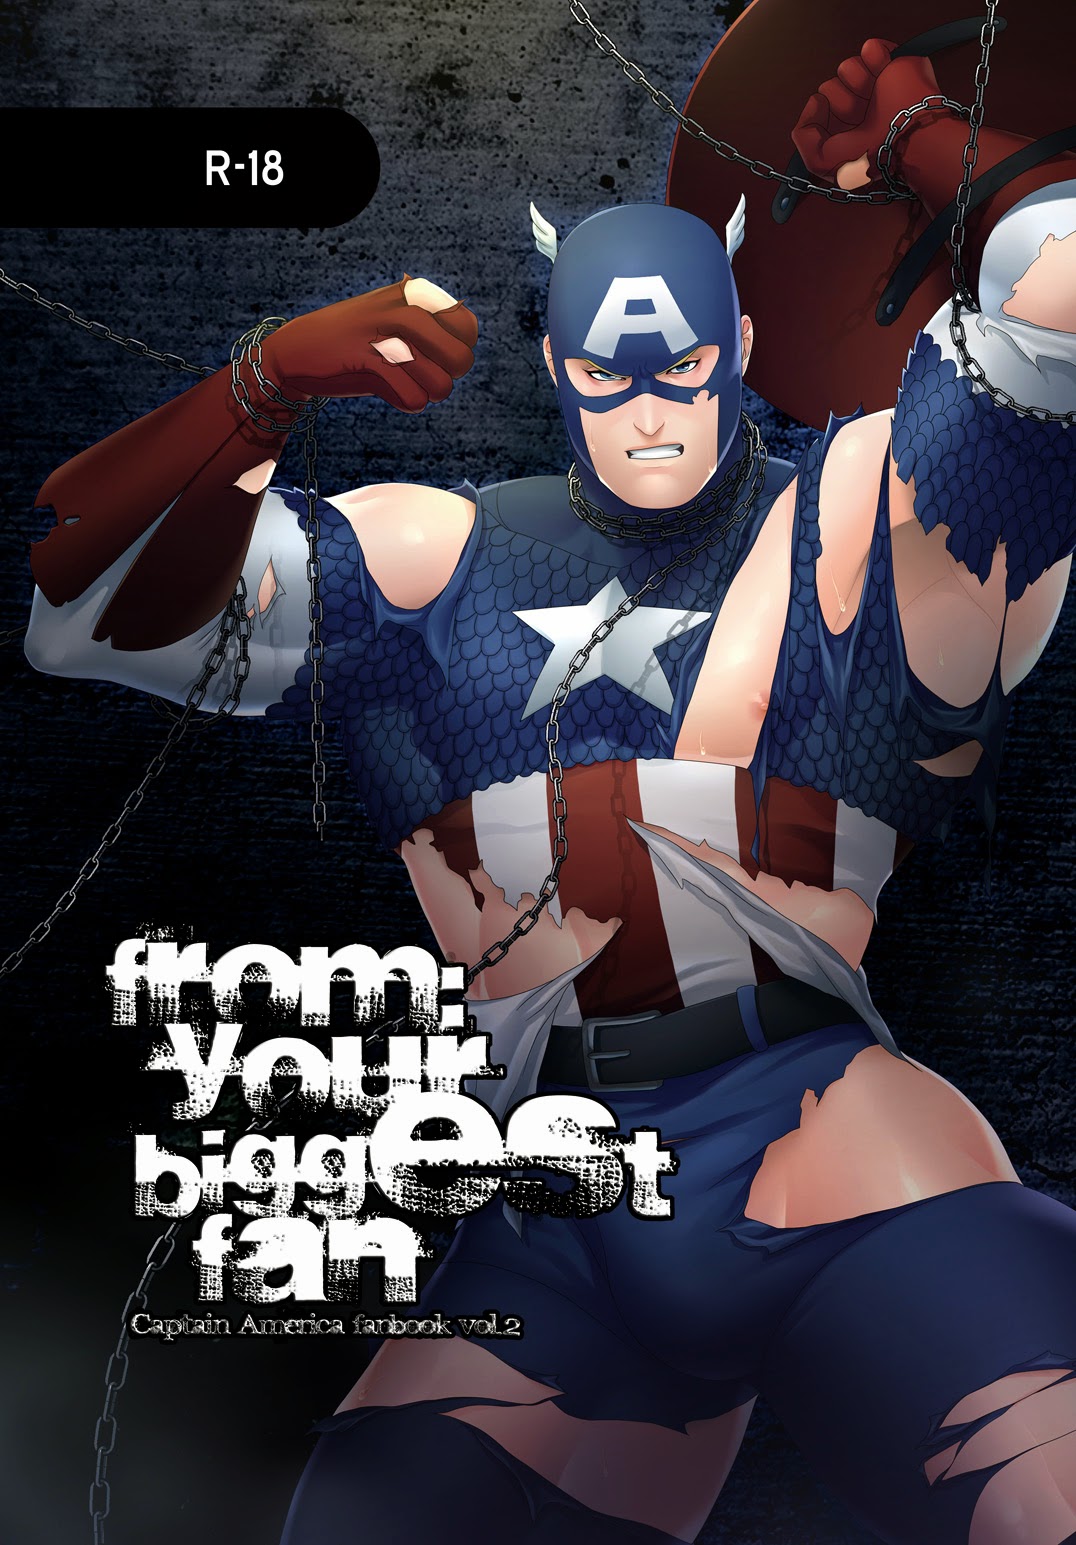 MA2 MXSXE 百瀬せー Captain America From Your Biggest Fan